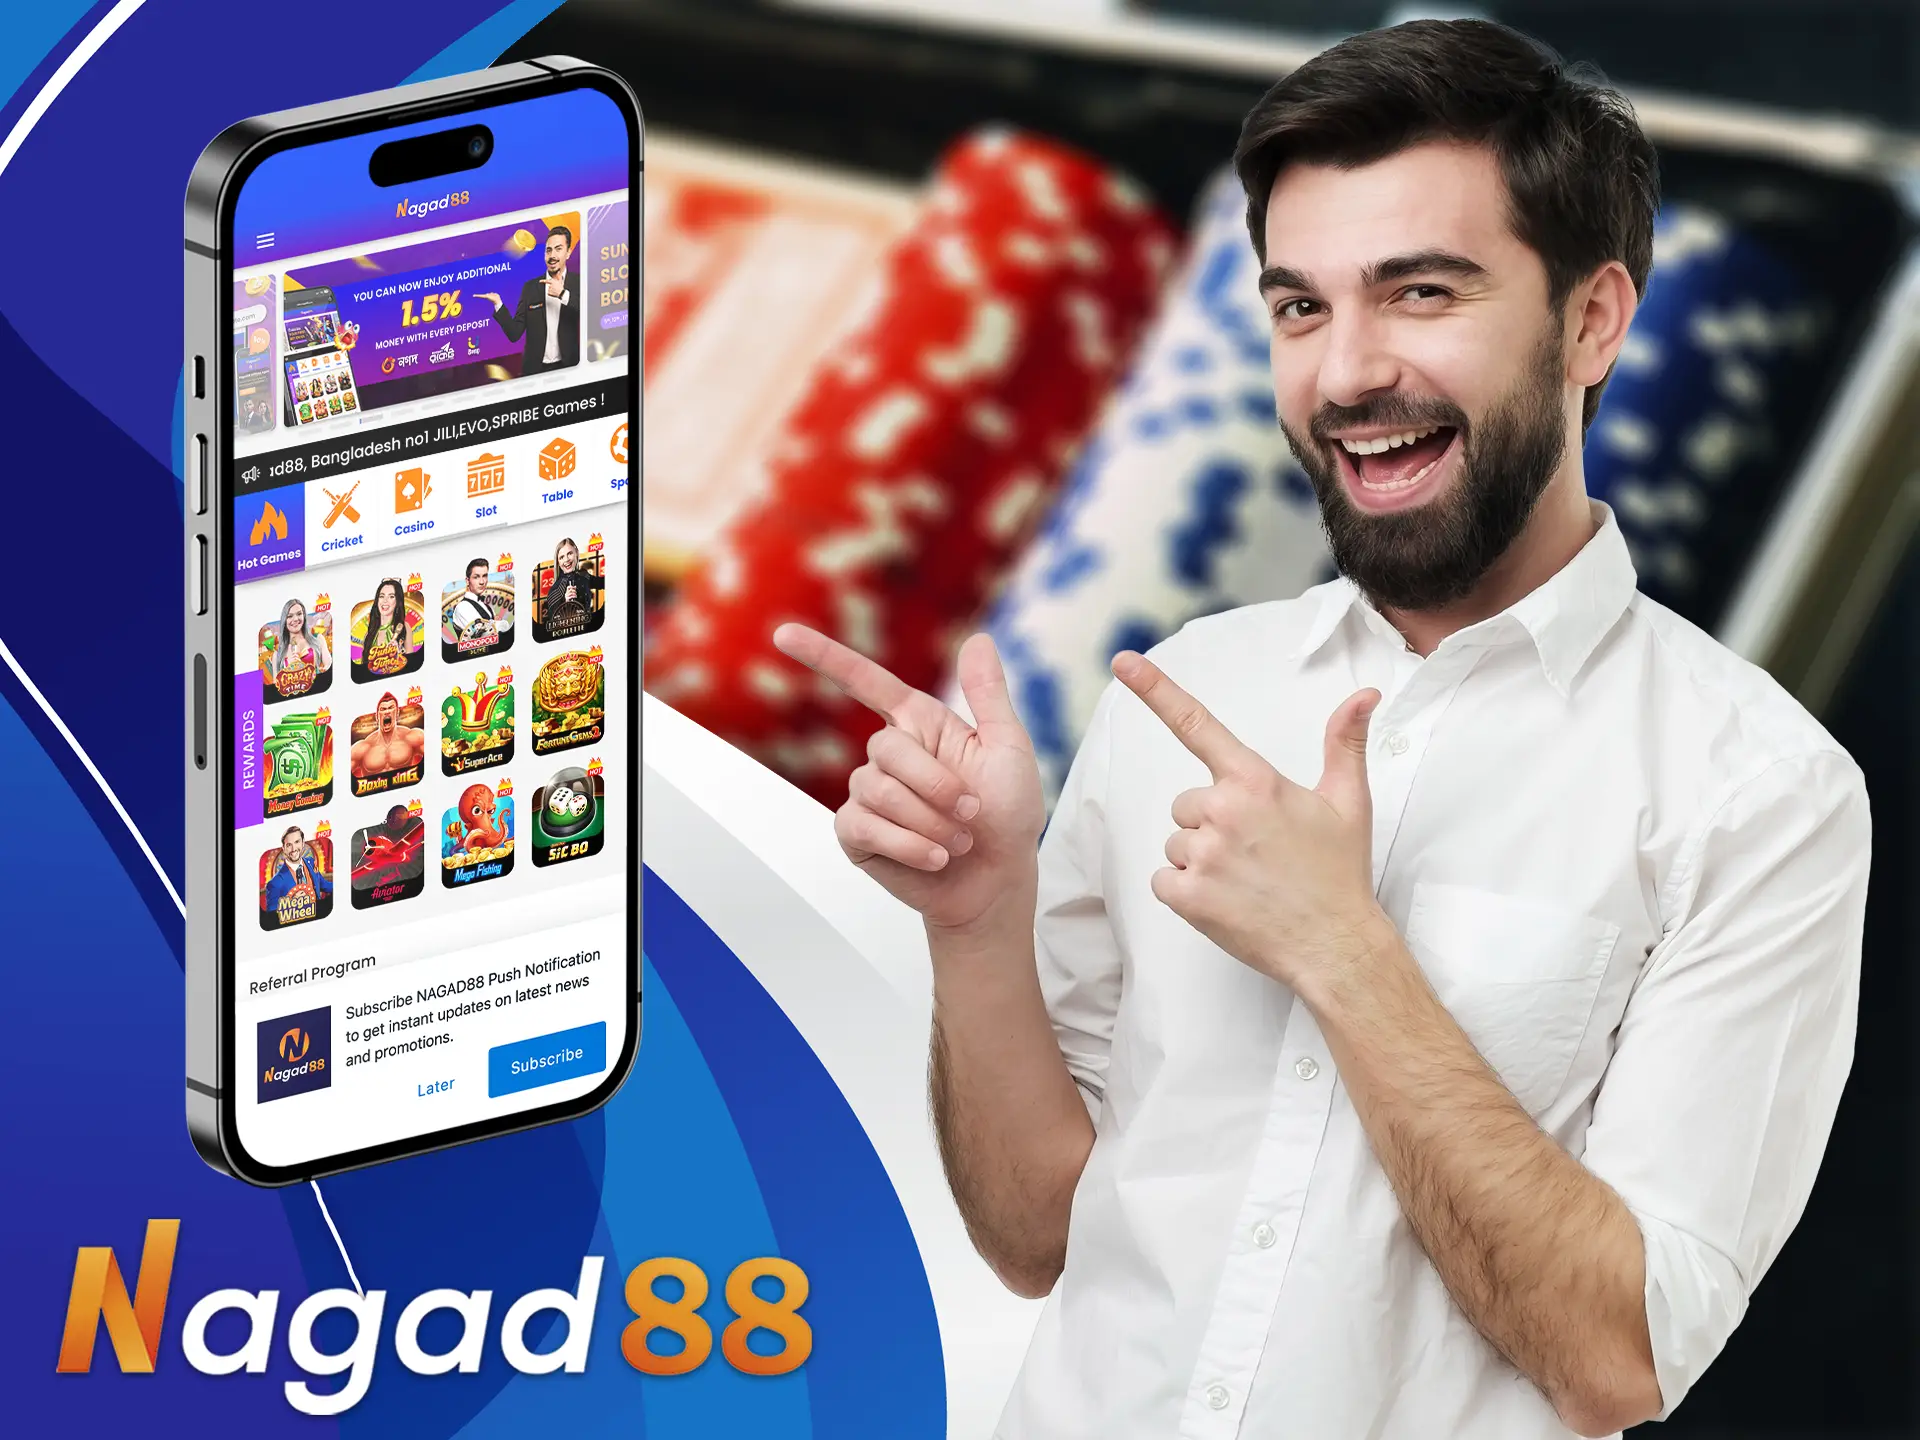 We can confidently recommend Nagad88 to our readers, because it has very simple registration, live dealers, pleasant offers and good support.